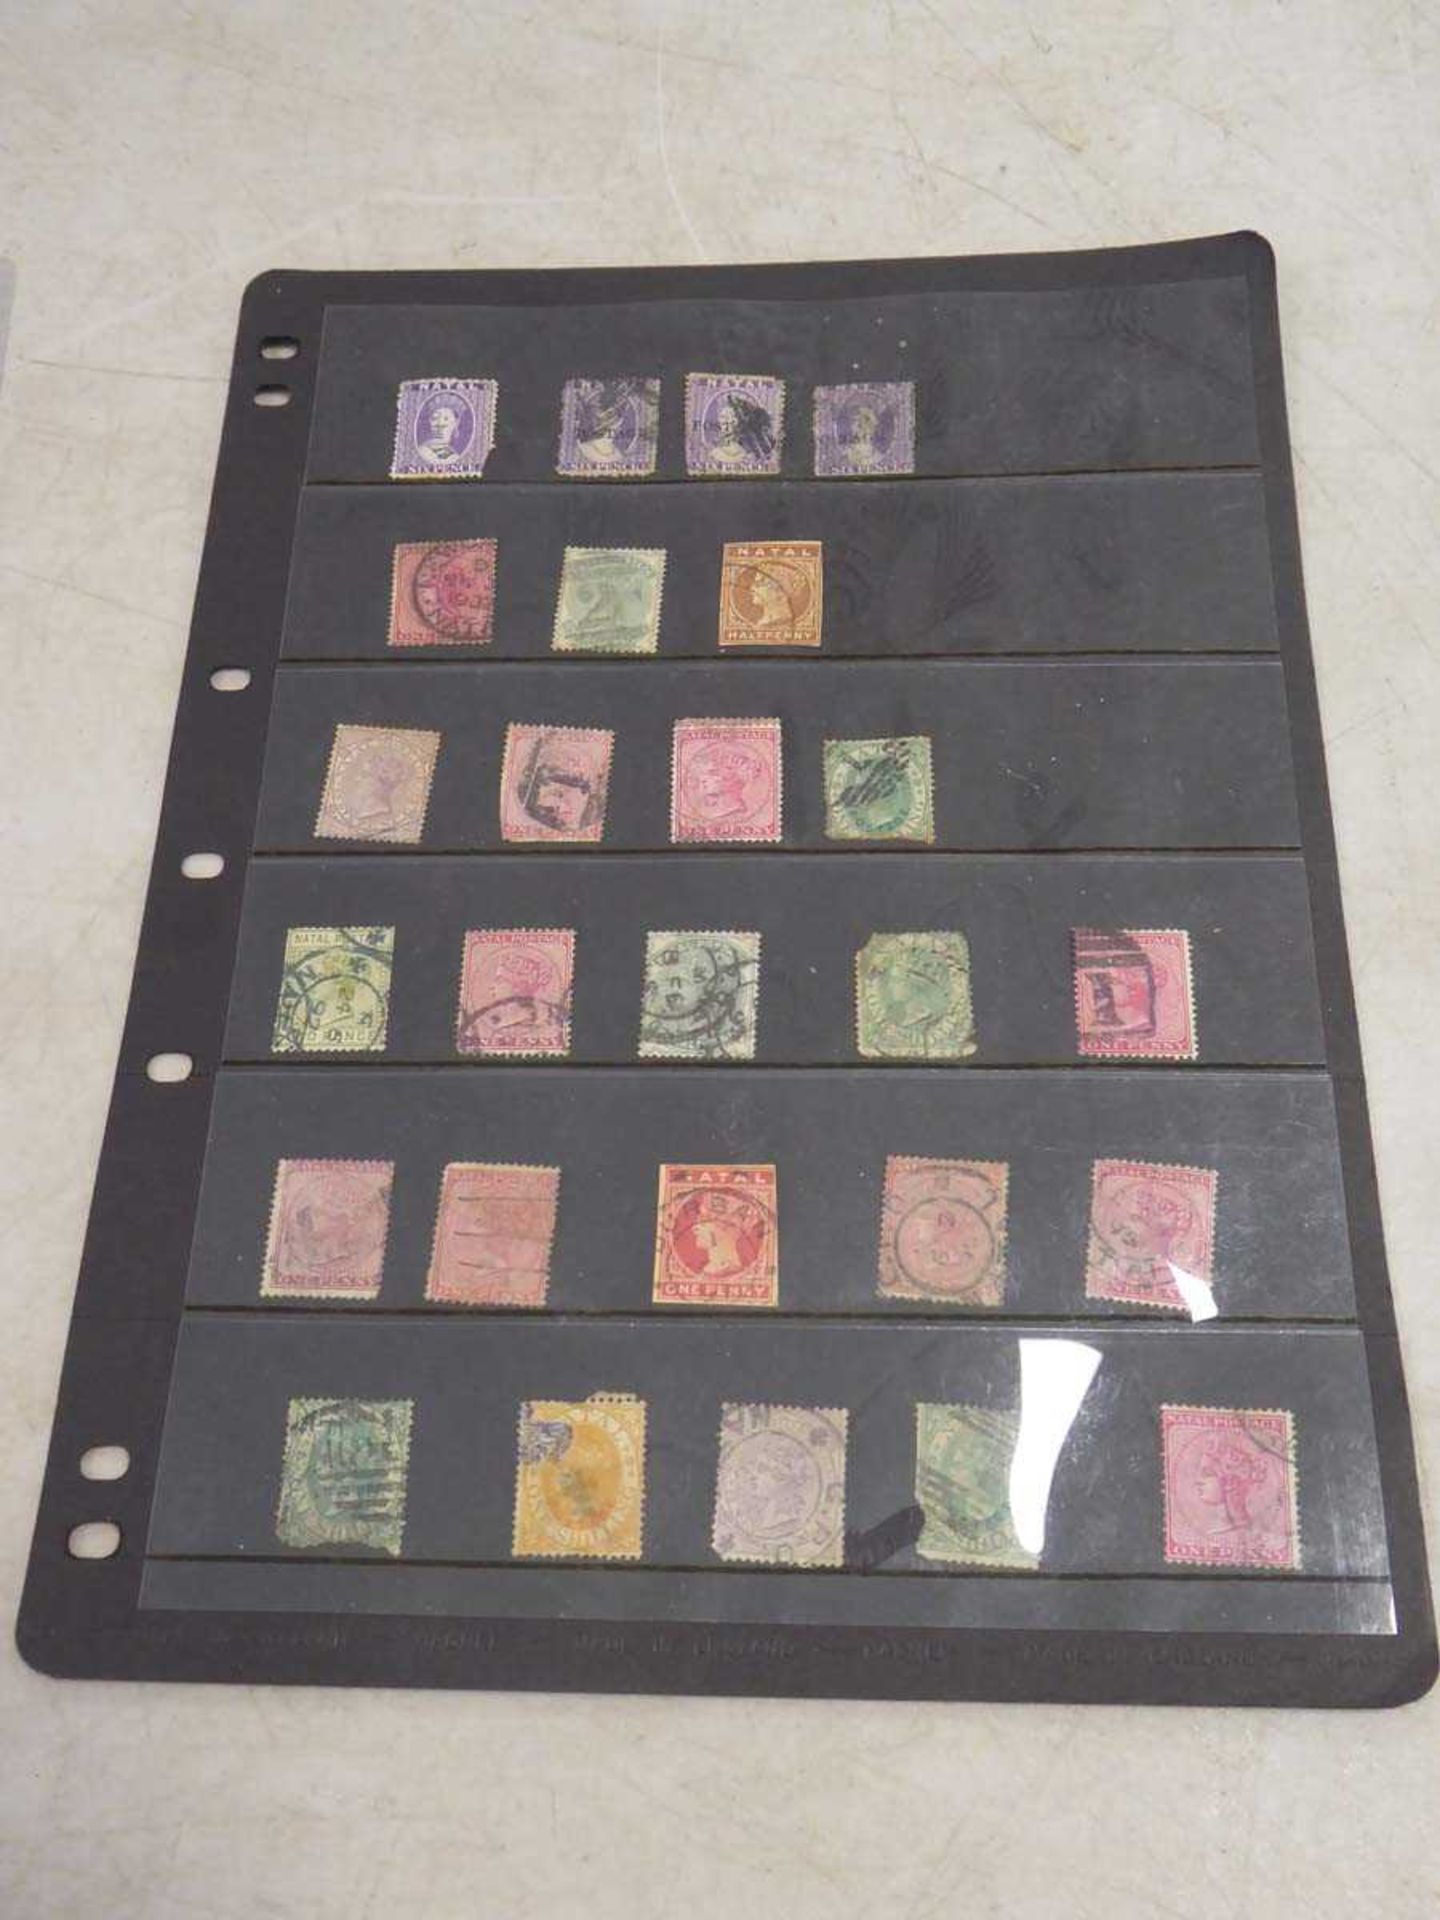 Sheet containing various world stamps